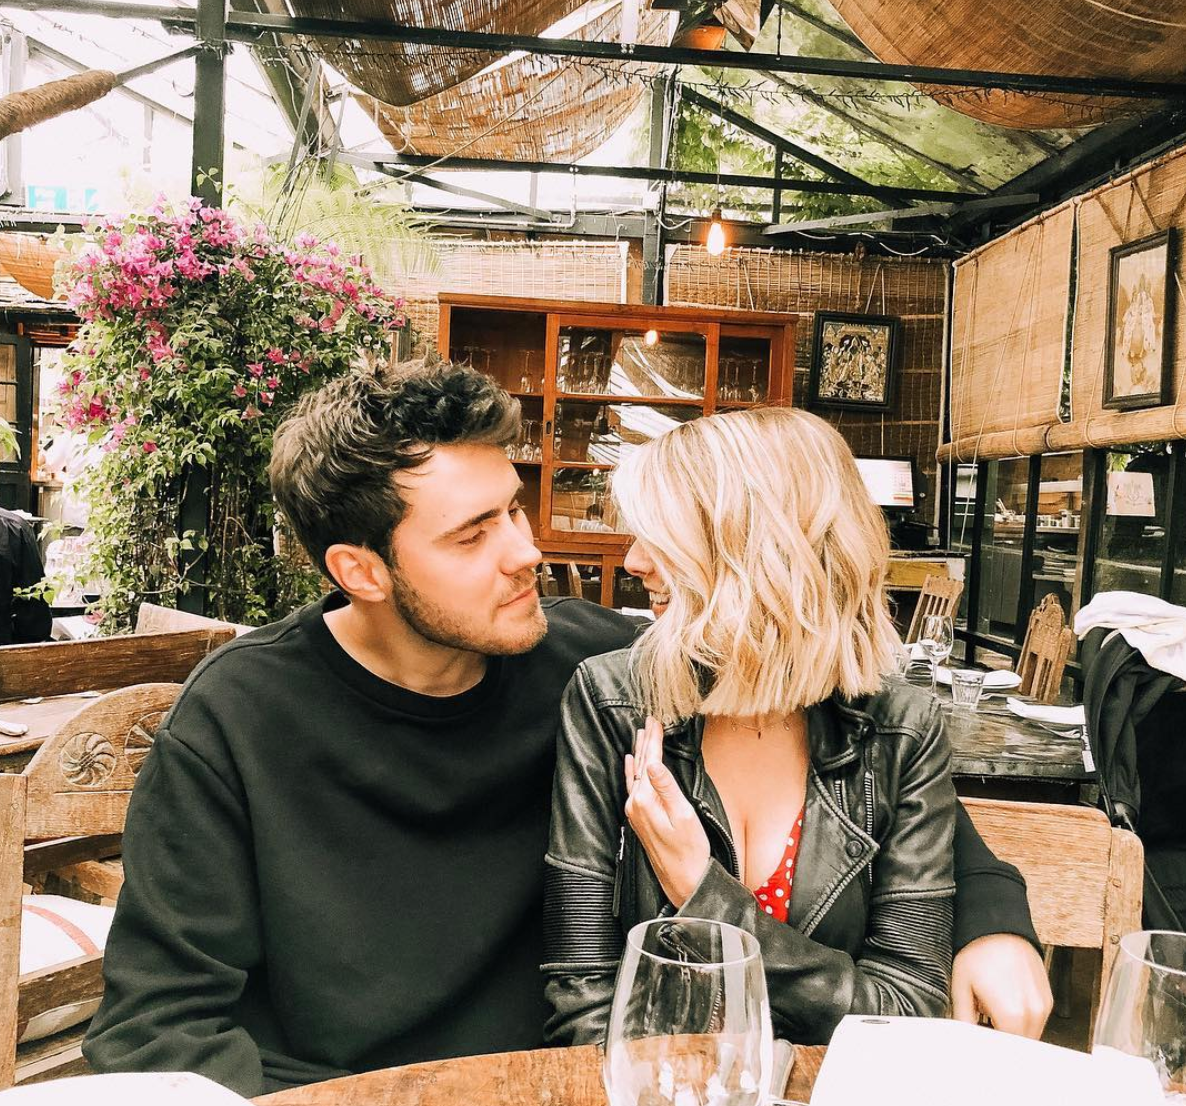 Alfie dating and announcement zoella Who is